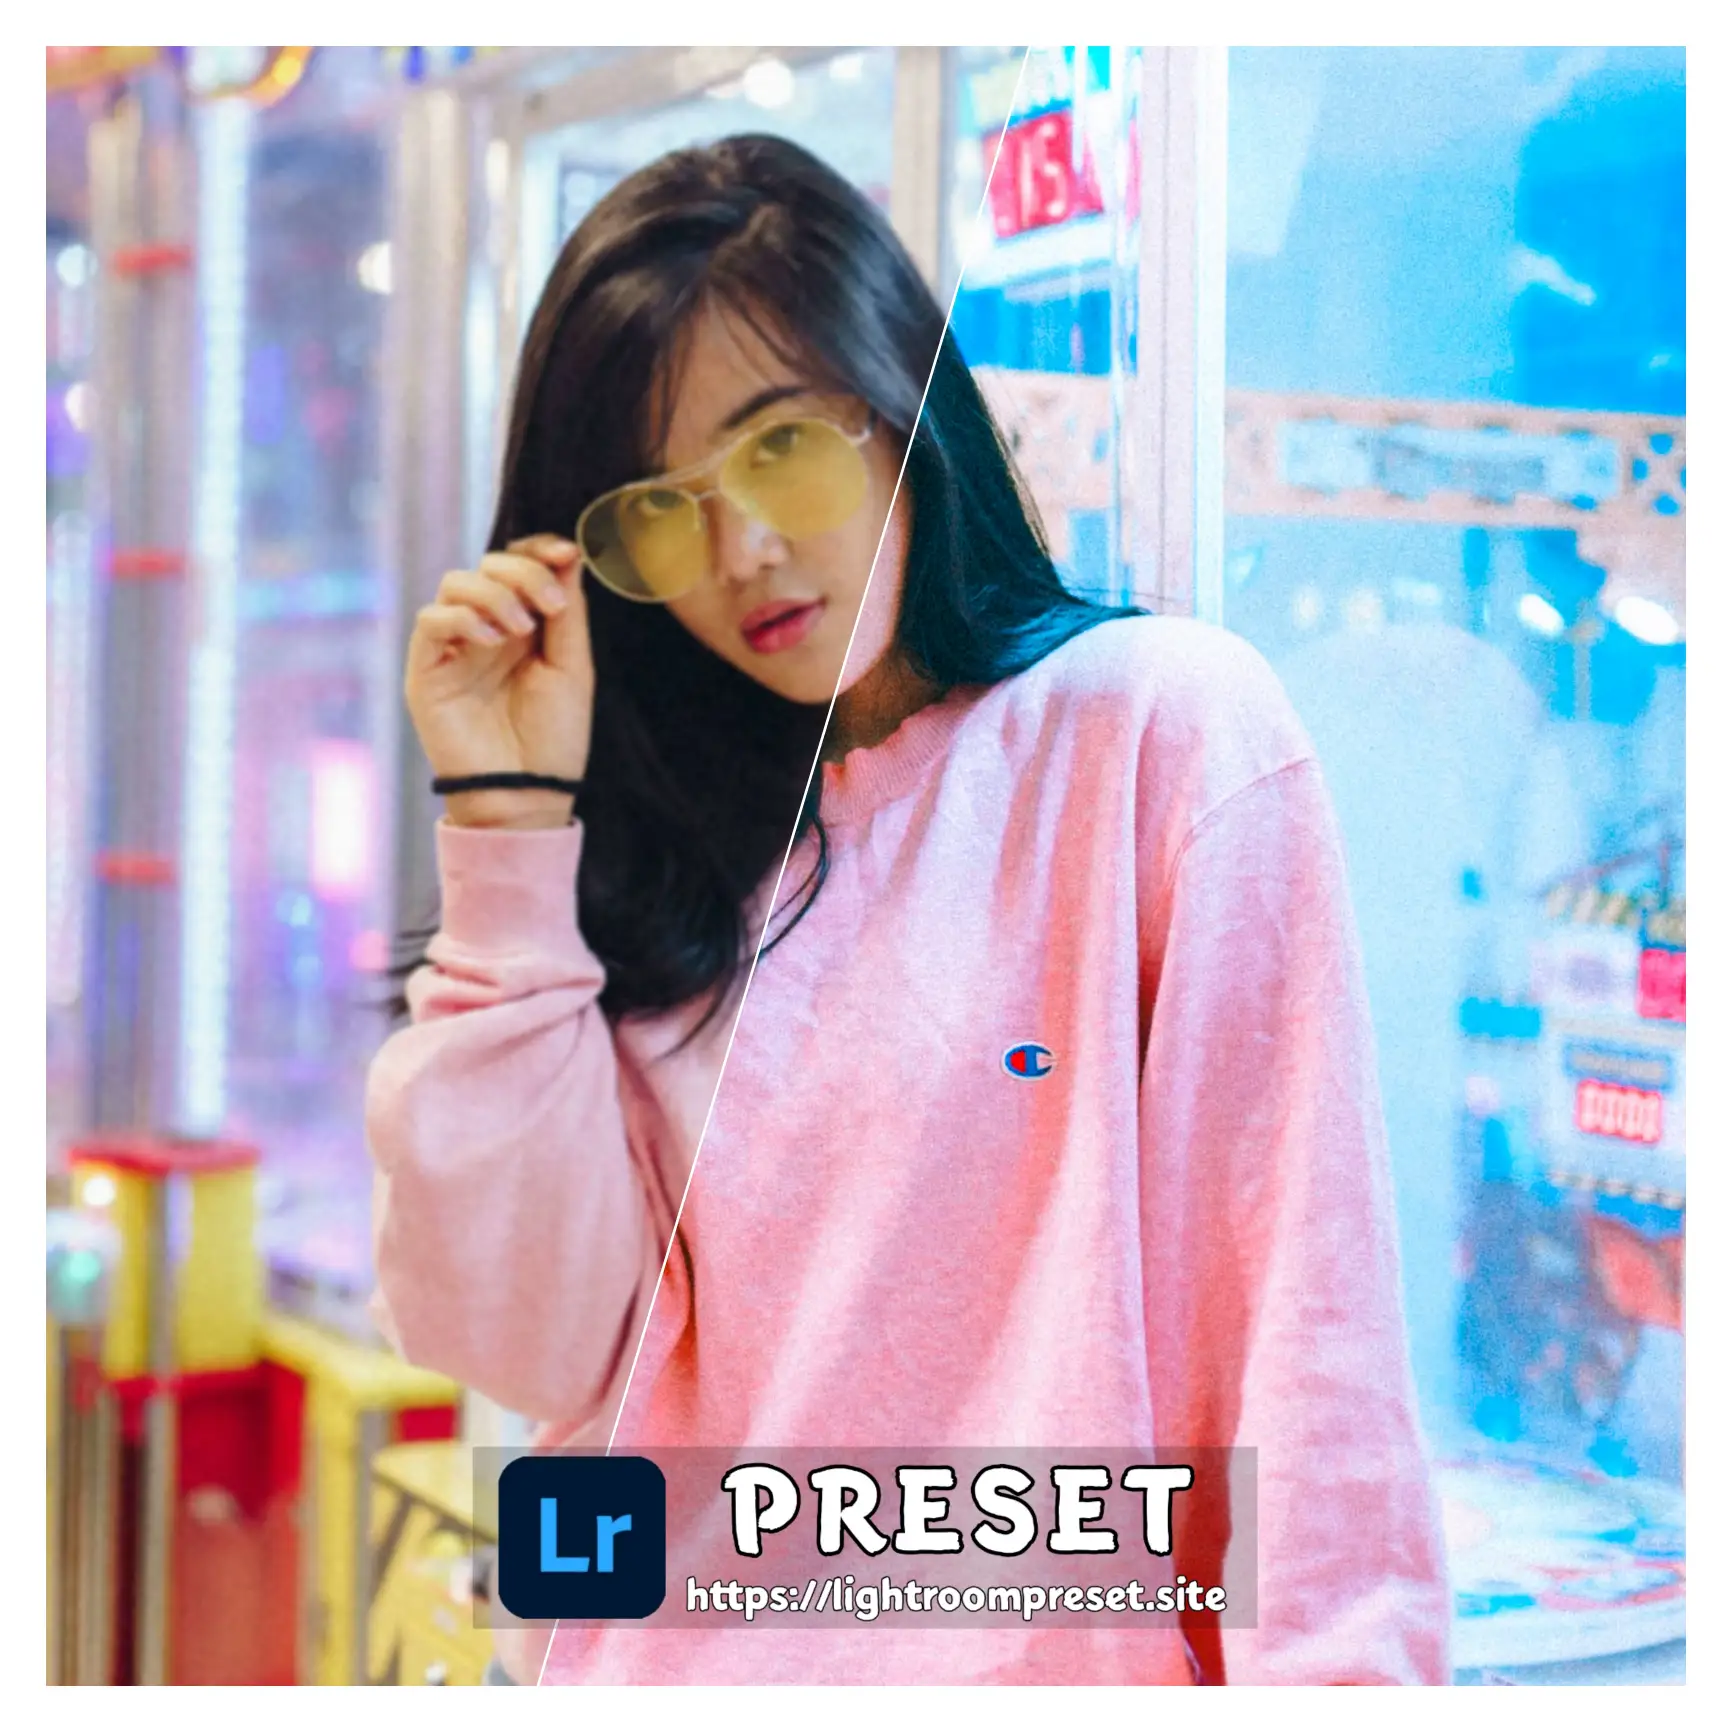 You are currently viewing Professional lightroom presets download